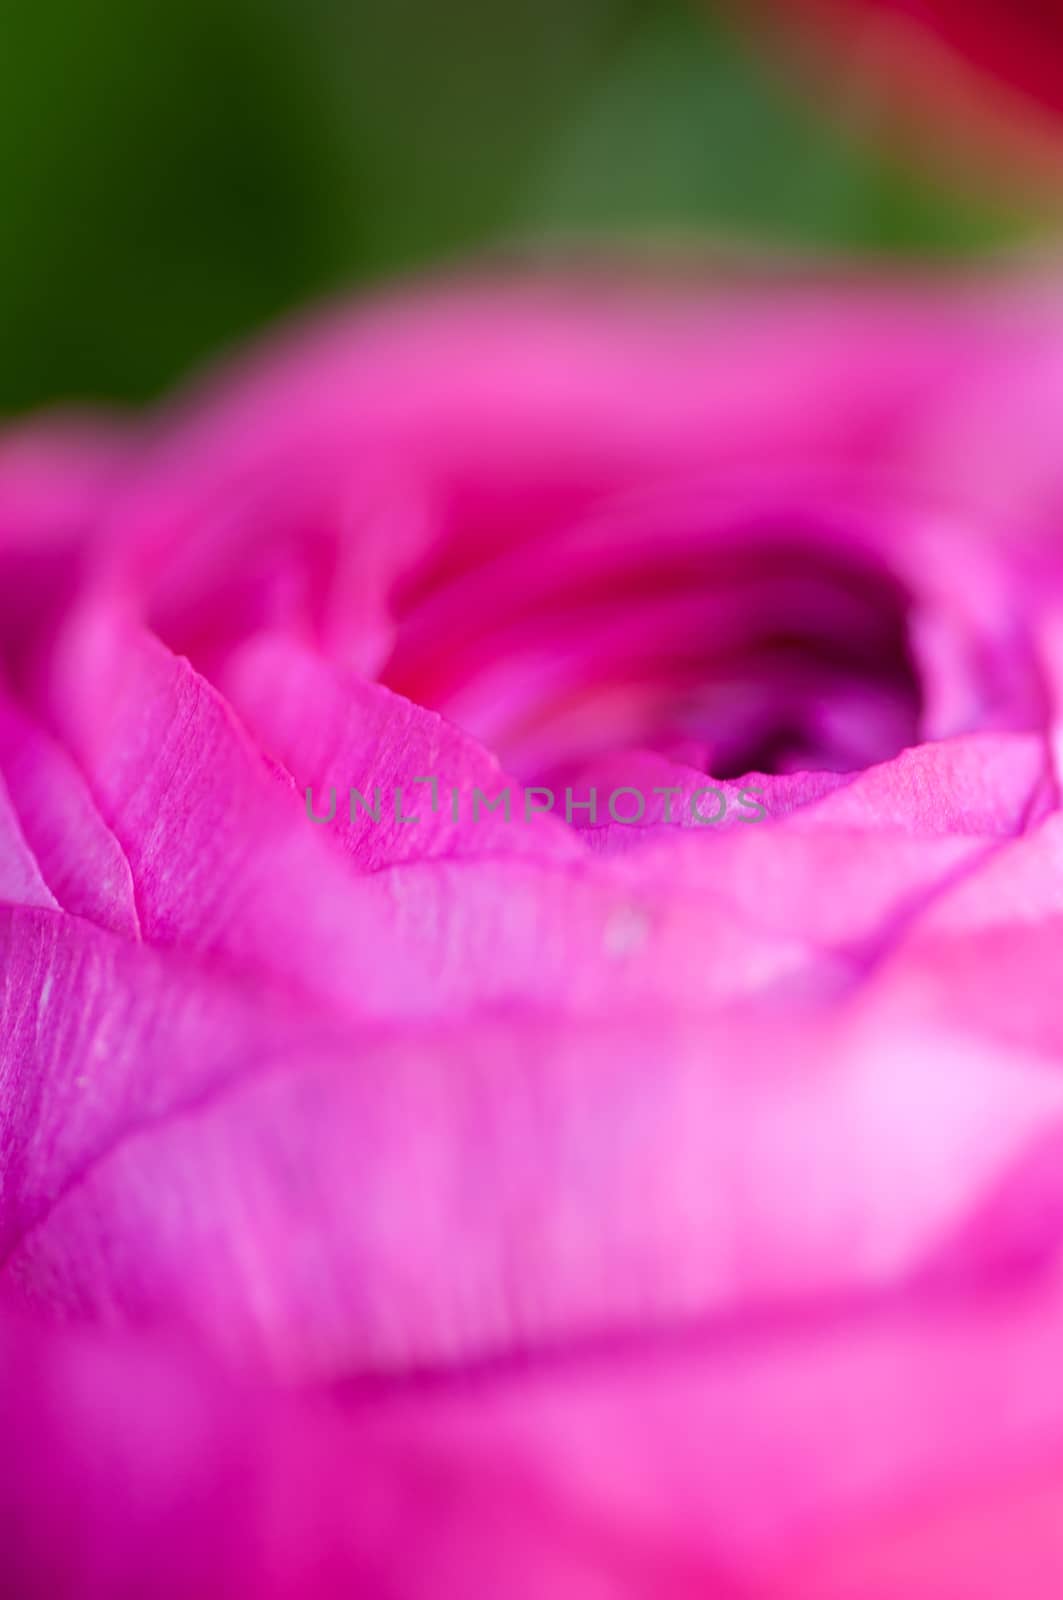 Up close and pink  by bartystewart